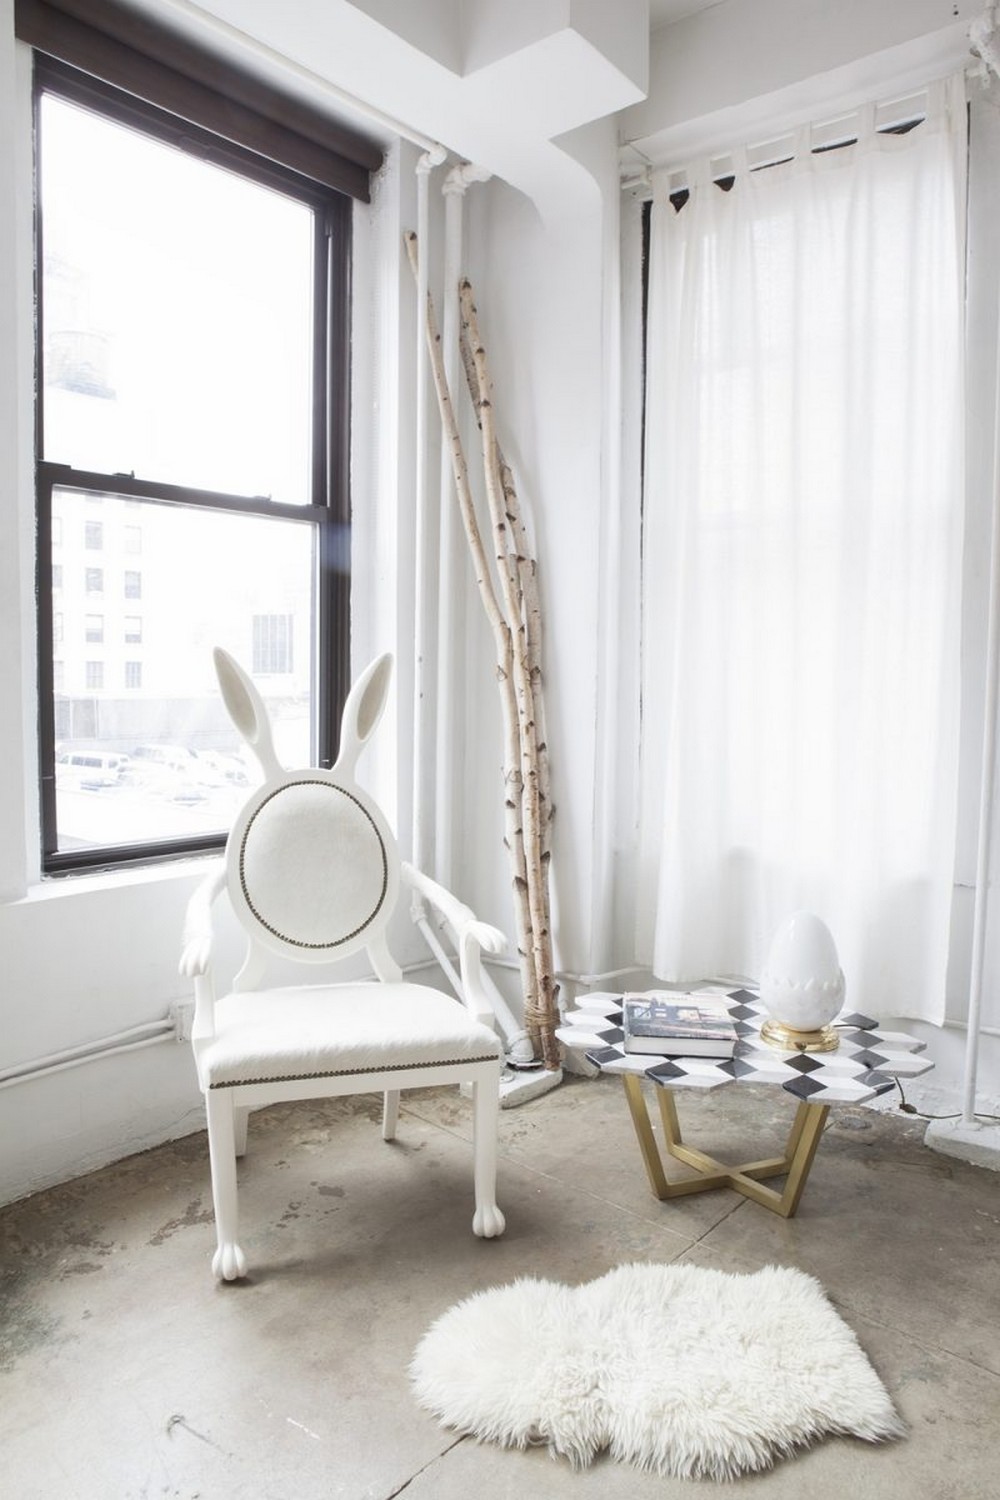 Merve Kahraman Shows You How To Combine Design With Sustainability